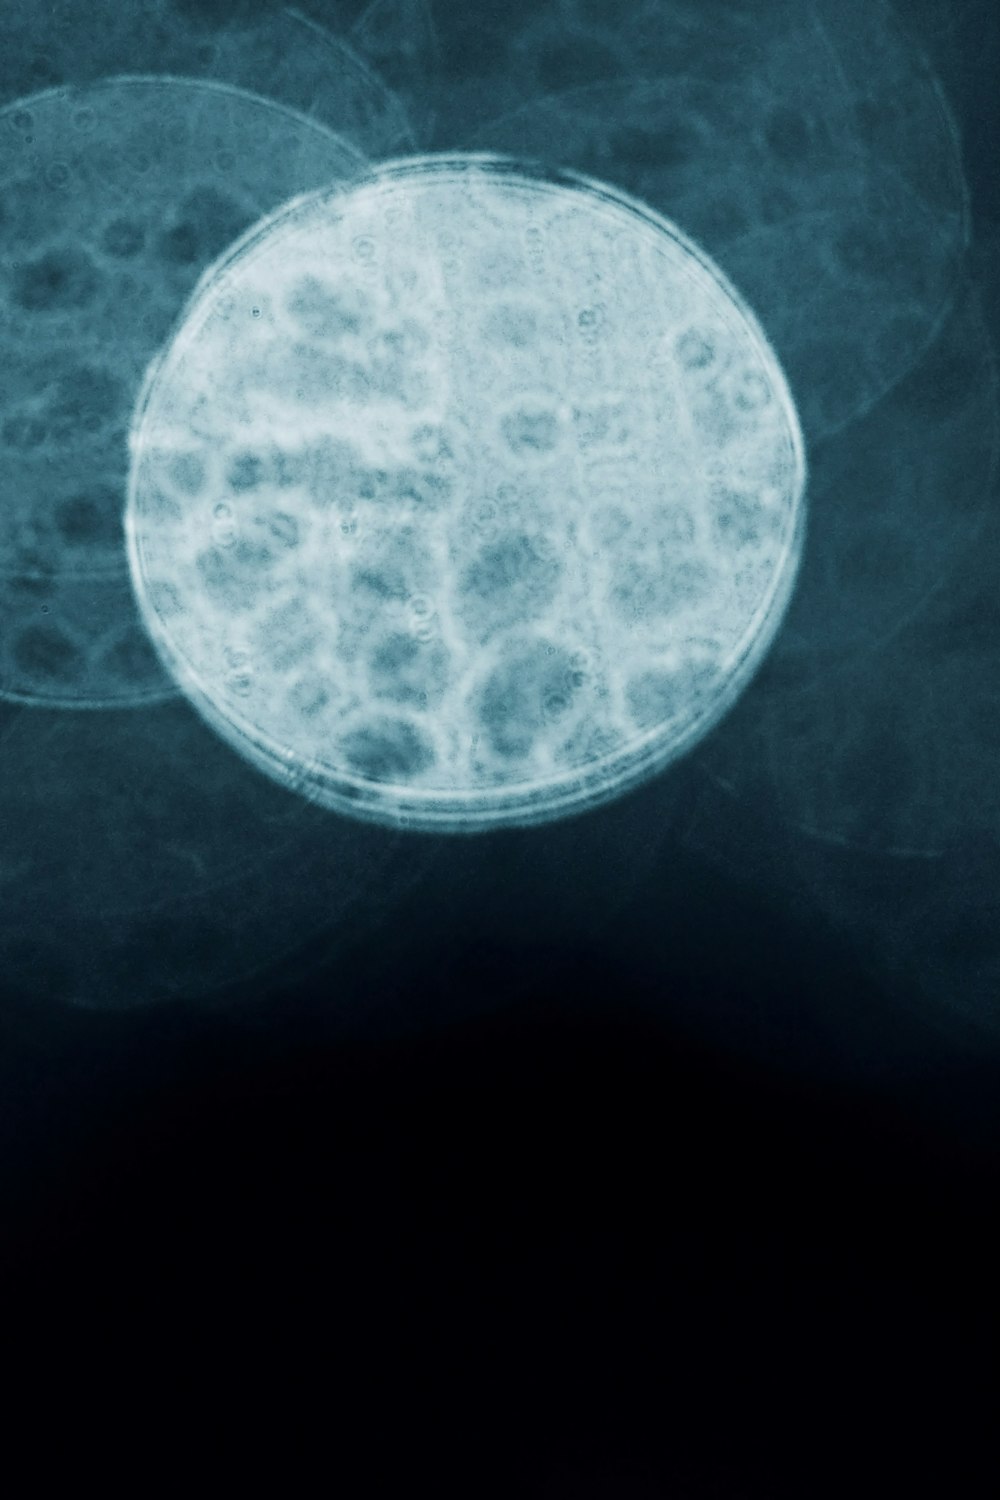 an image of a round object in the dark